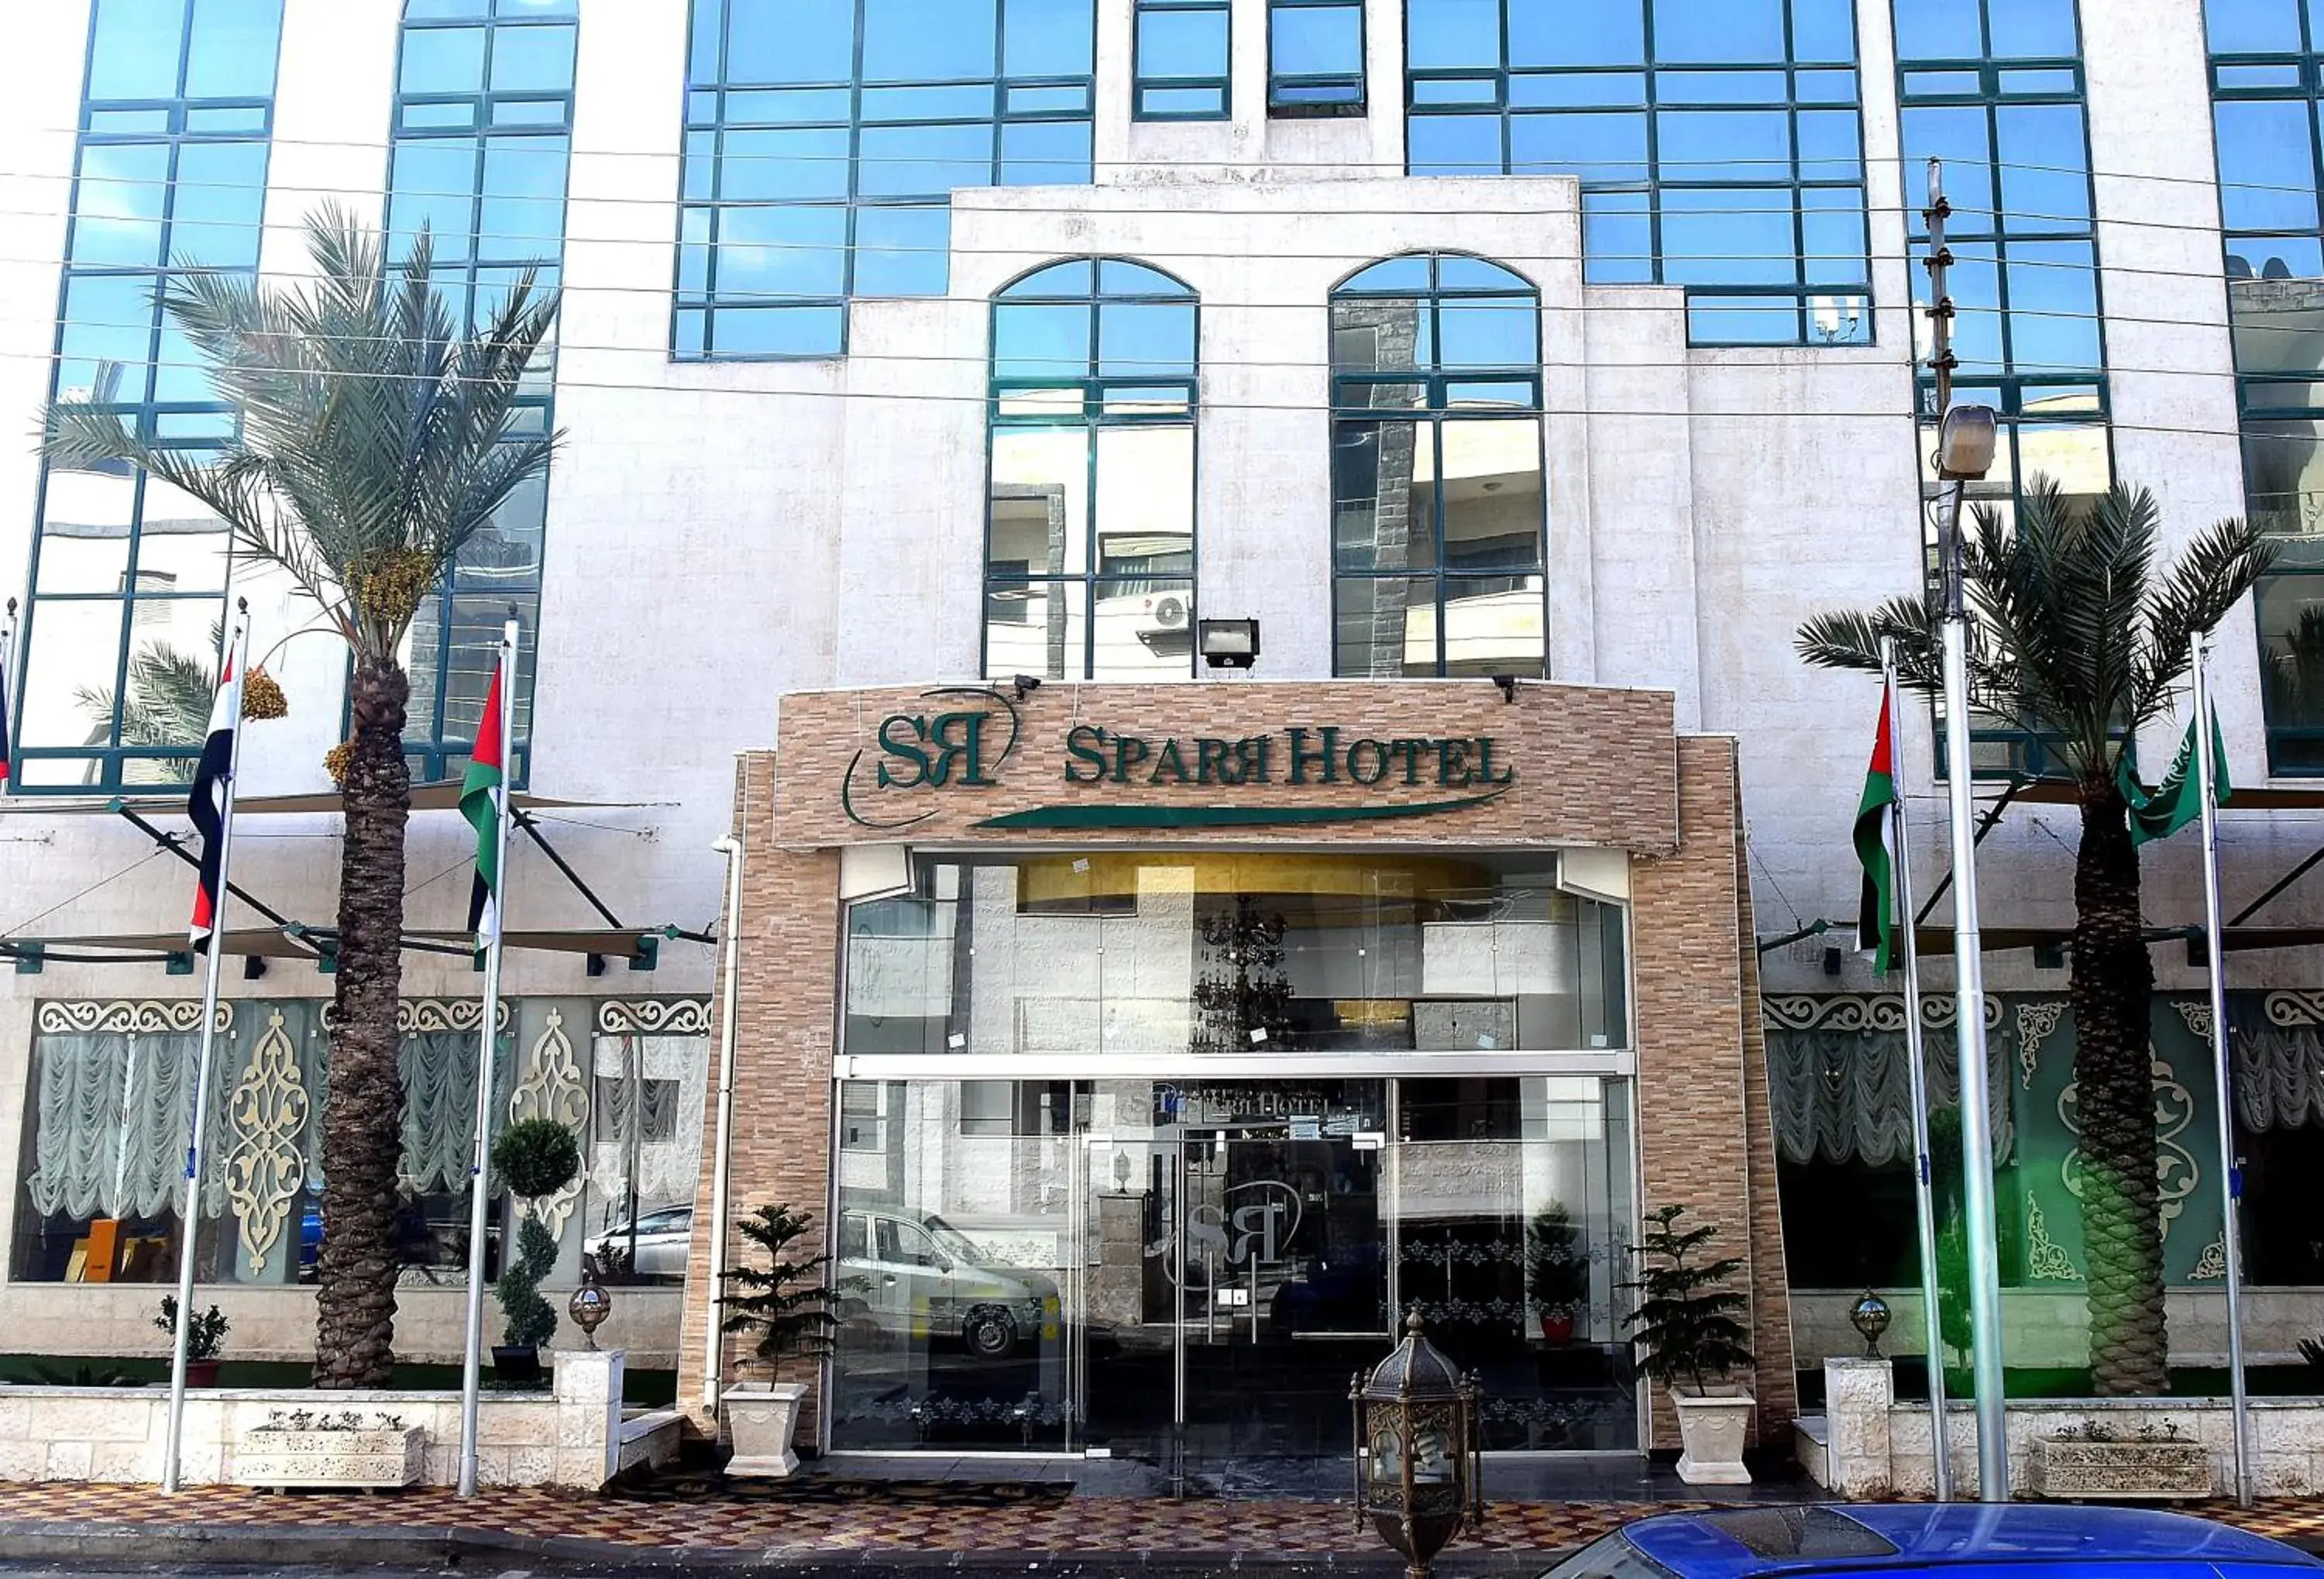 Property building in Sparr Hotel